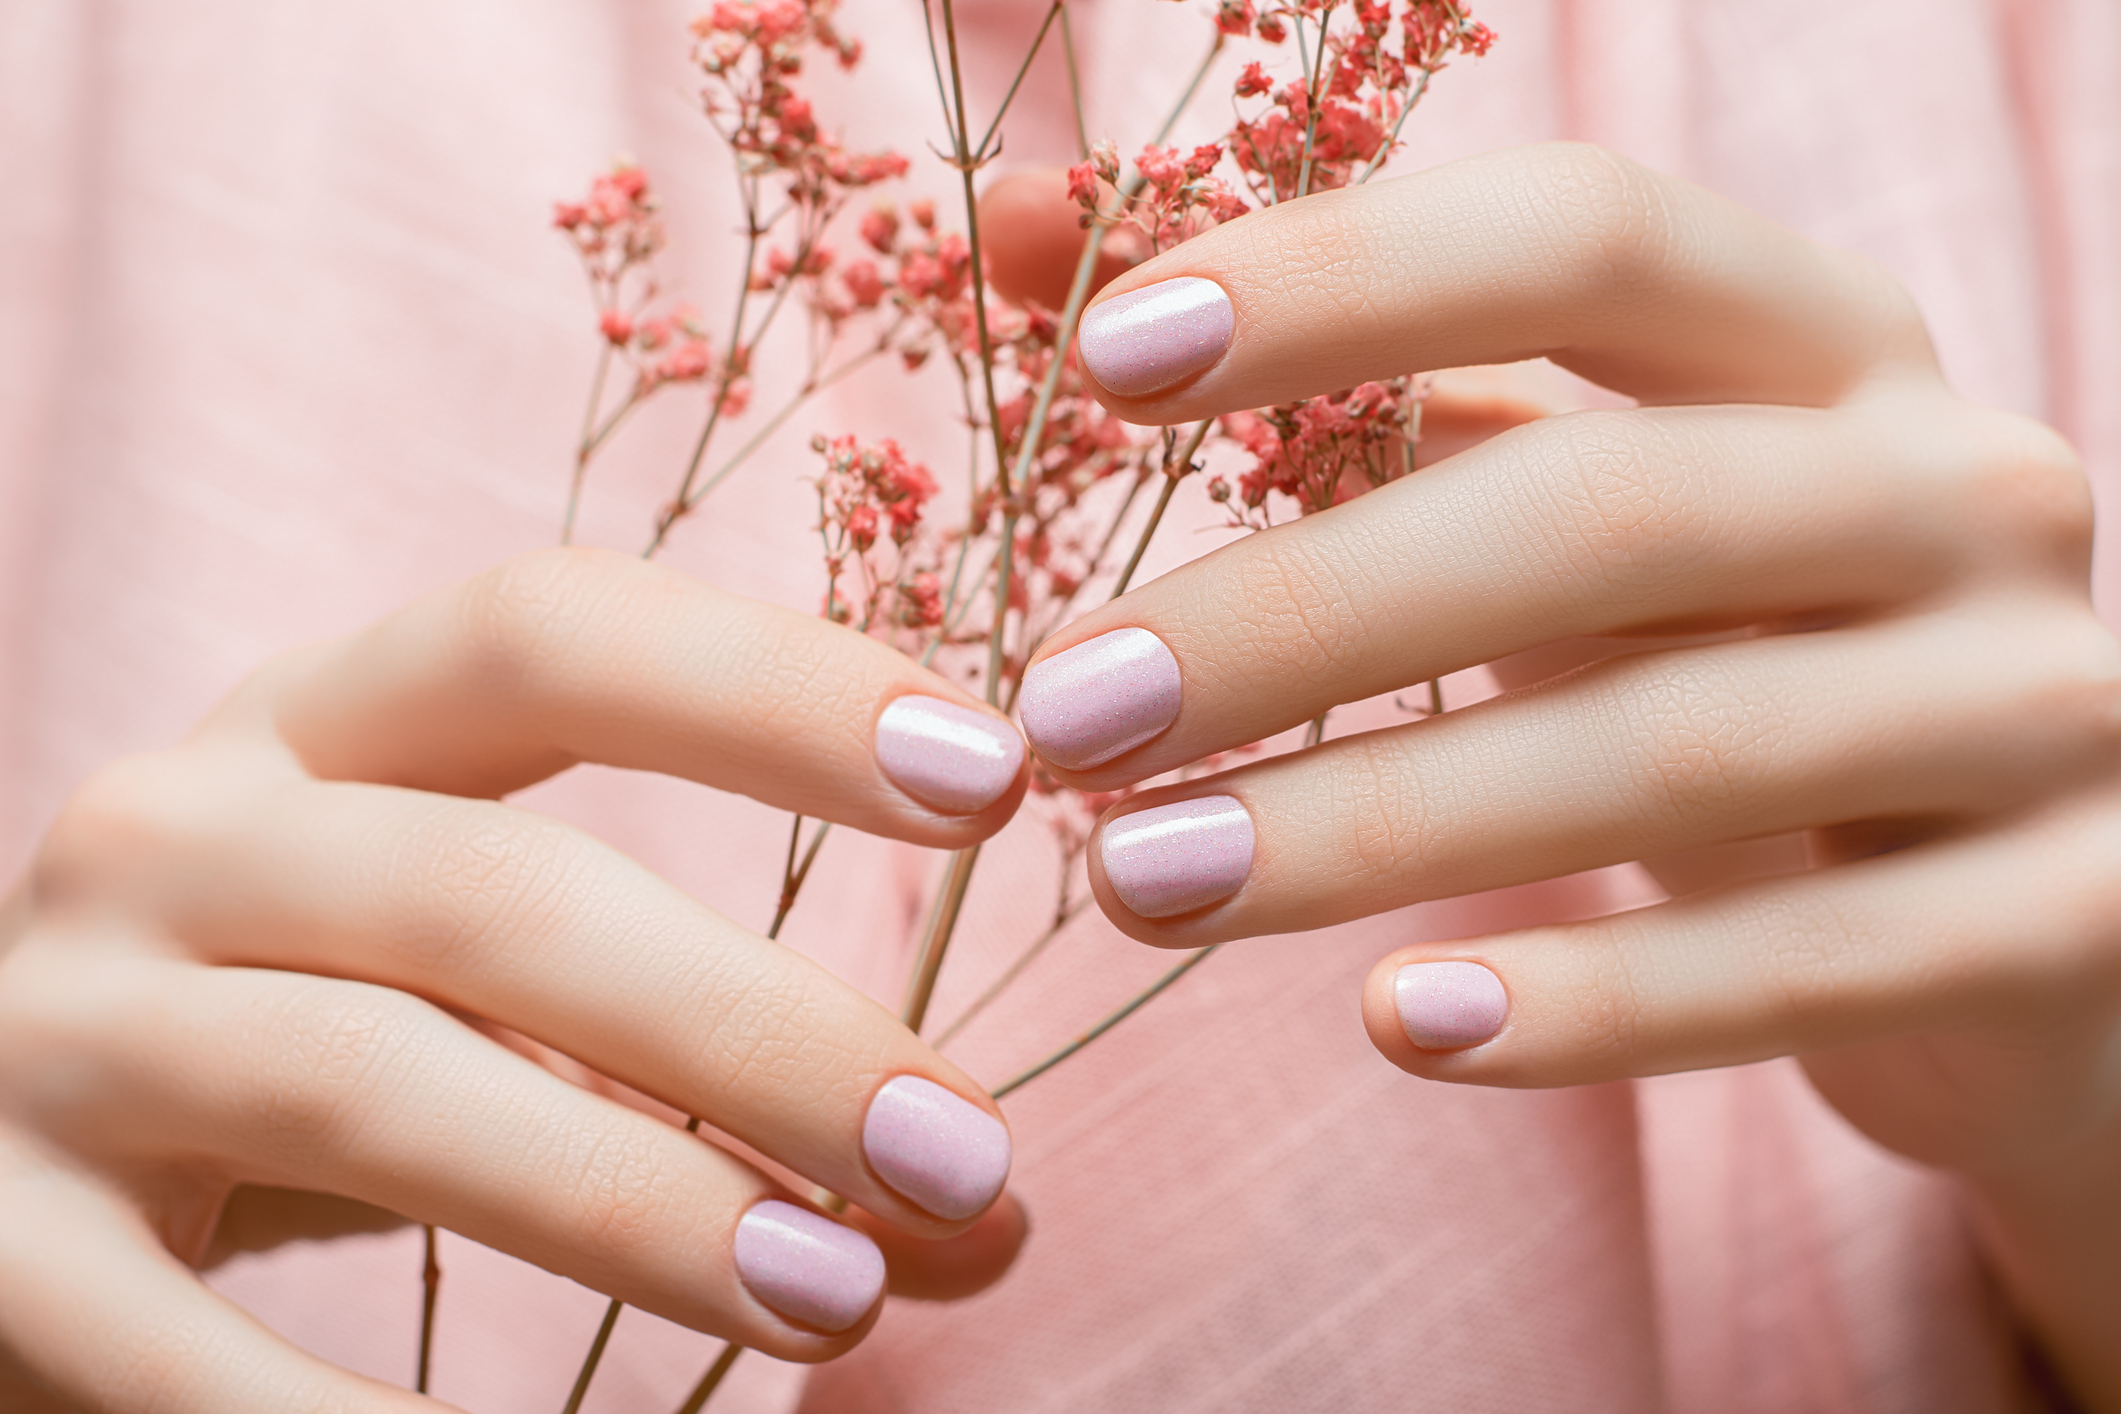 Female hands with pink nail design. Pink nail polish manicure. Woman hands hold orange flowers.